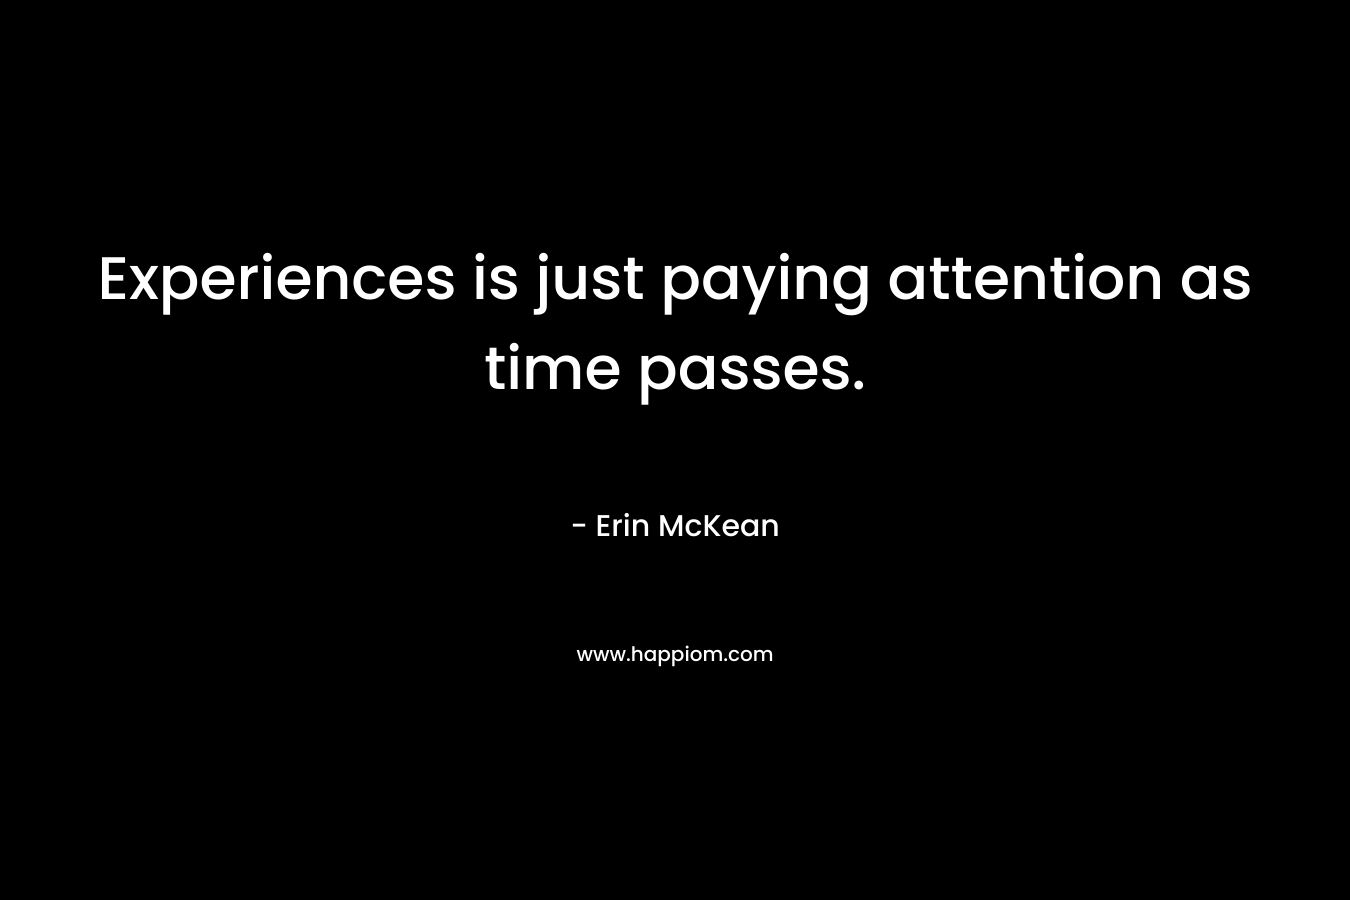 Experiences is just paying attention as time passes.